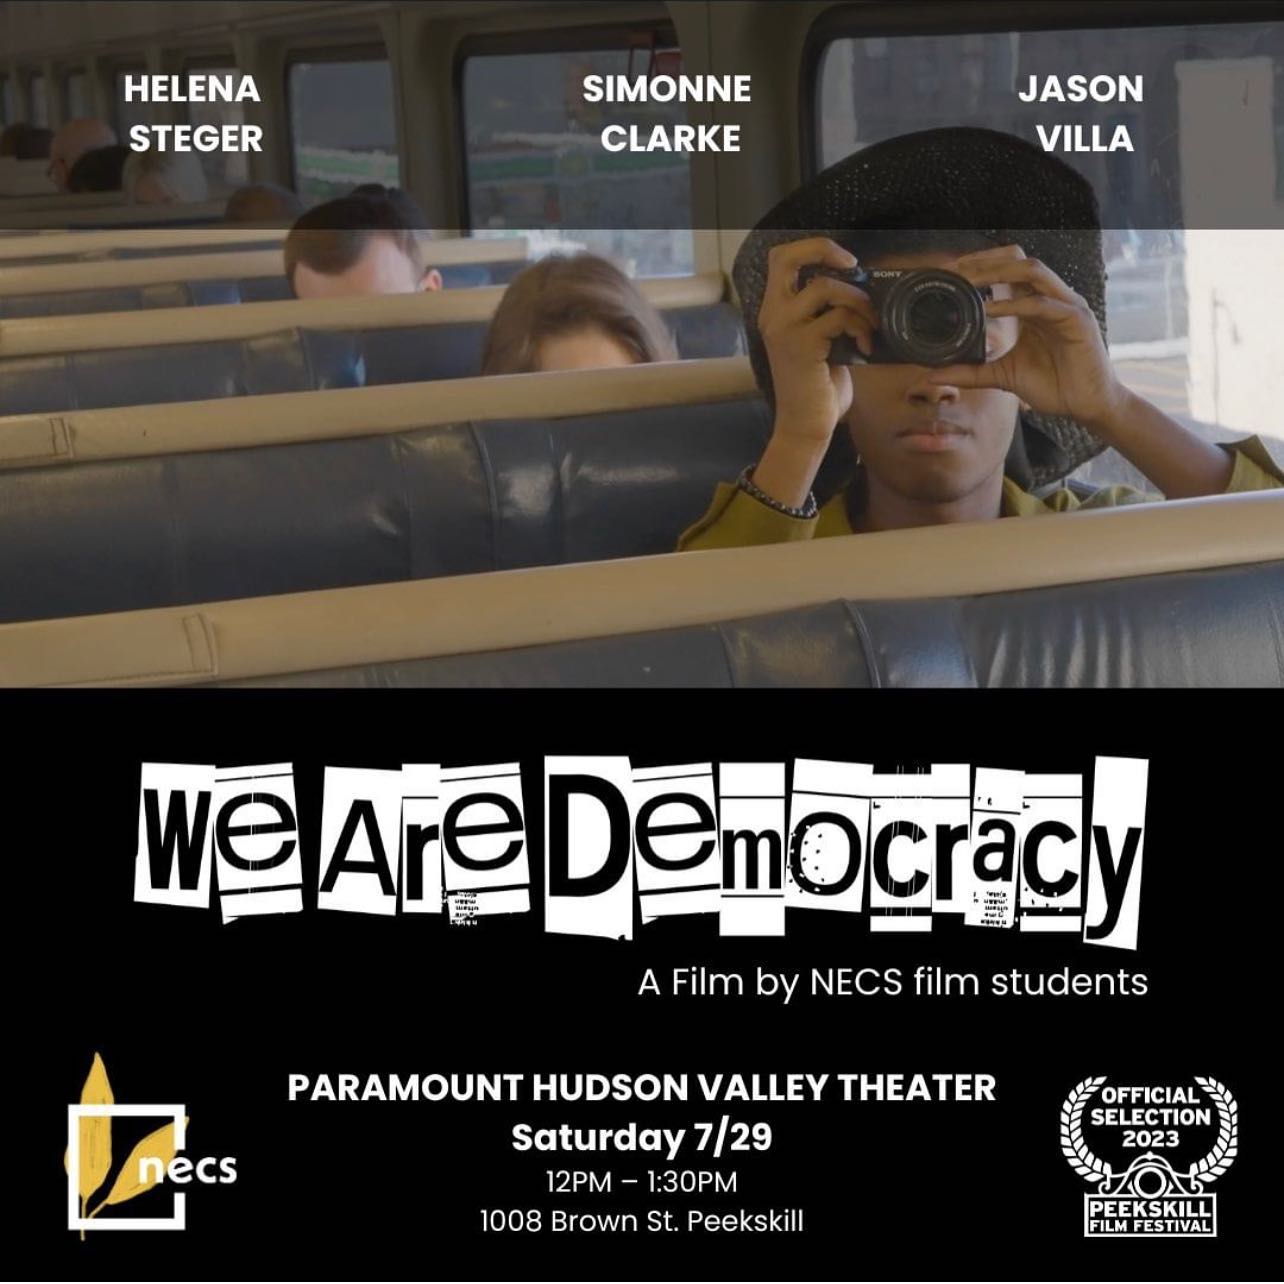 Movie poster for "We Are Democracy" a film by NECS students.